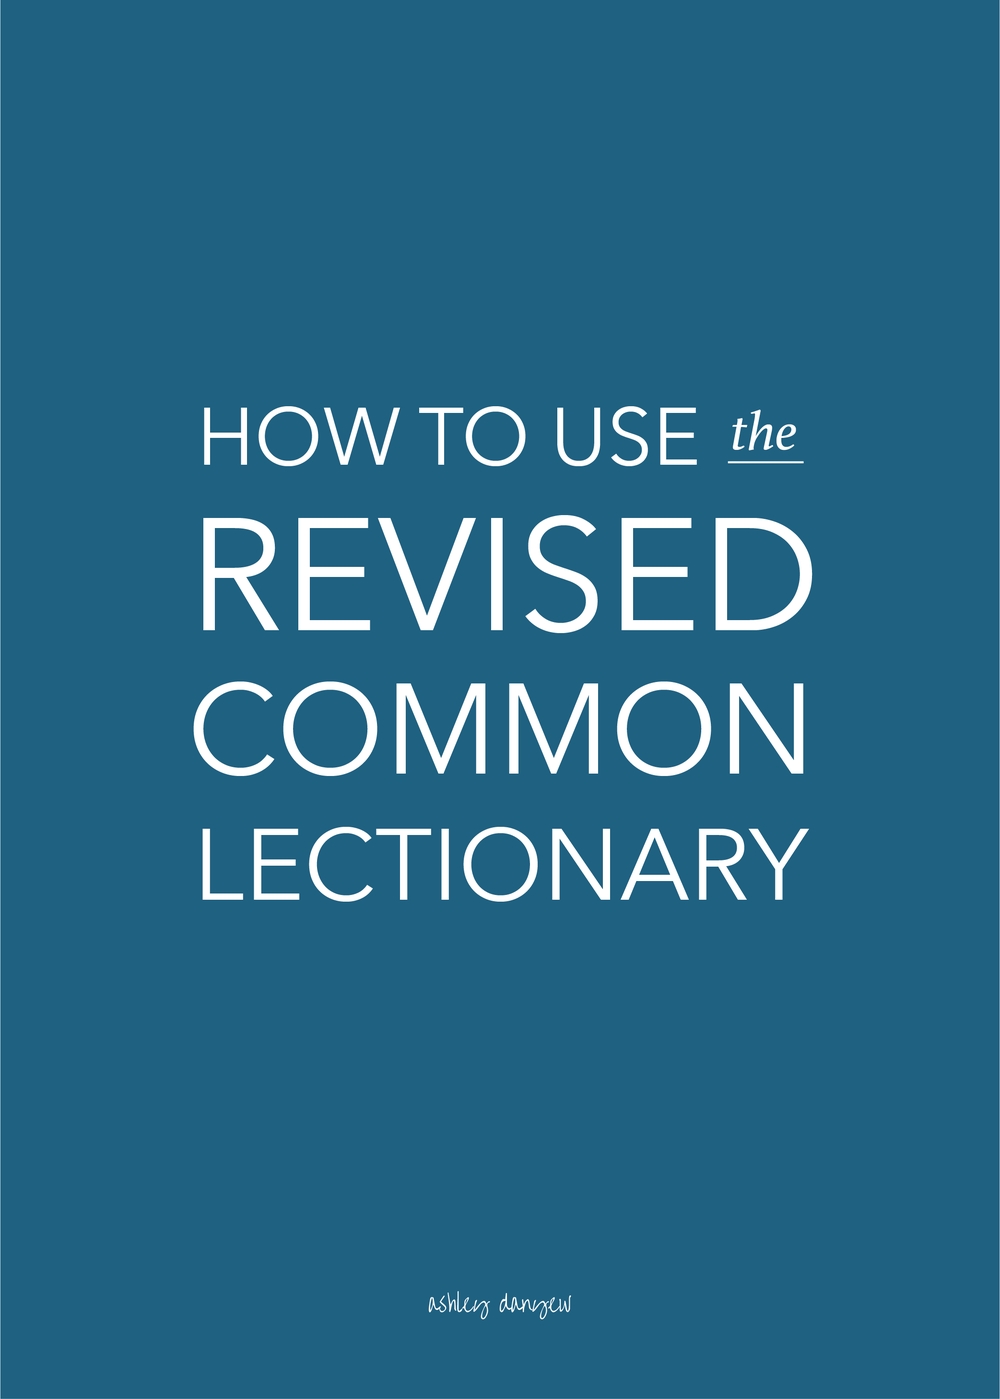 How To Use The Revised Common Lectionary | Ashley Danyew  Lectionary For This Week In United Methodist